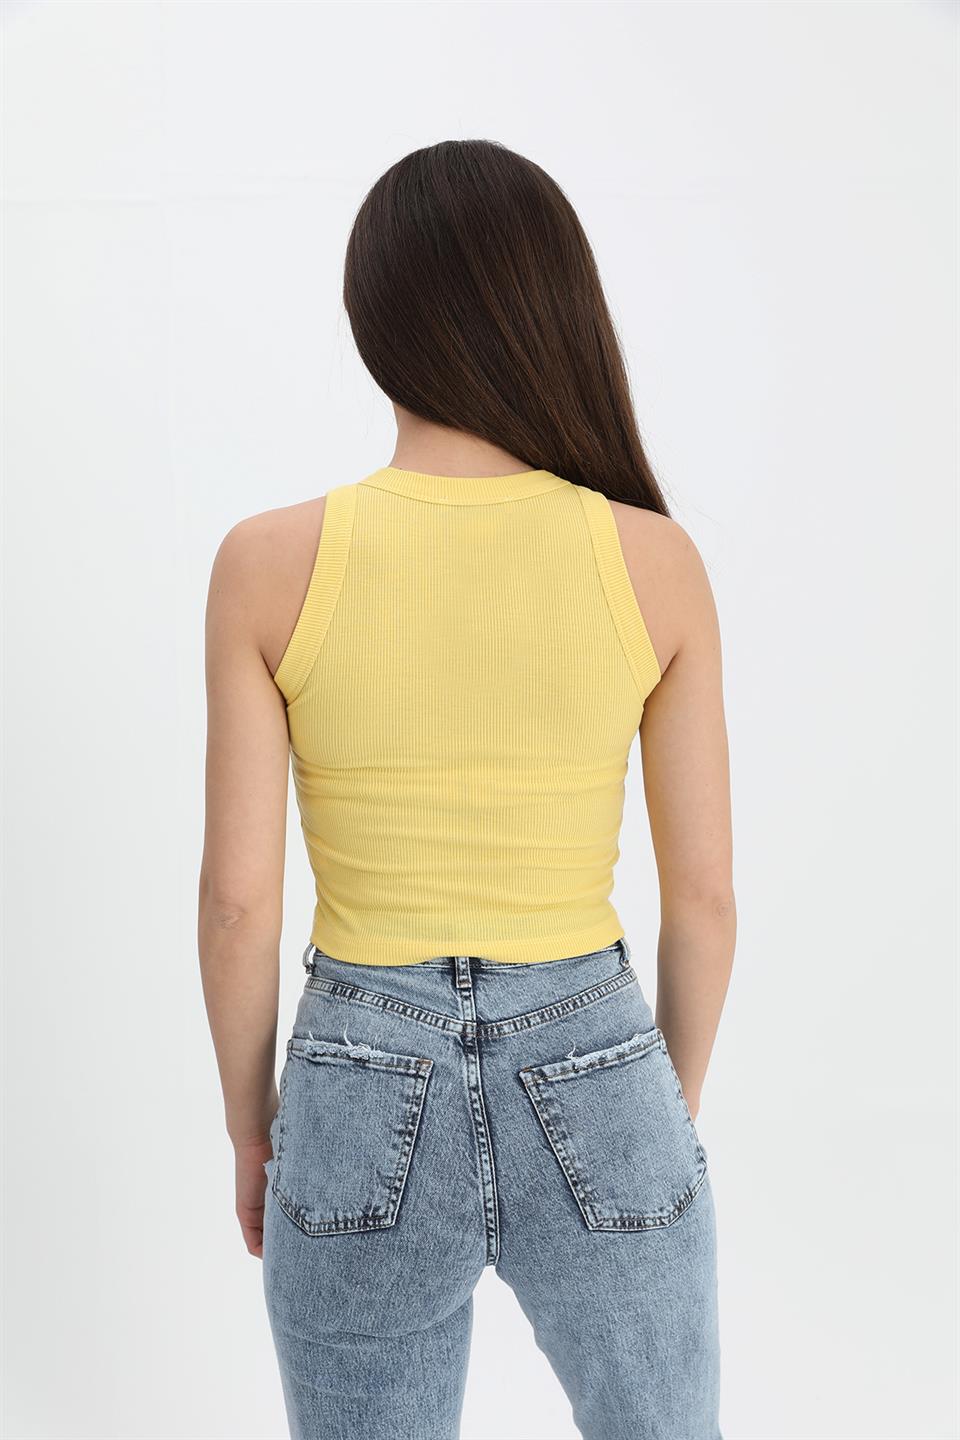 Women's Blouse Wide Plunging Sleeveless Camisole - Yellow - STREETMODE™